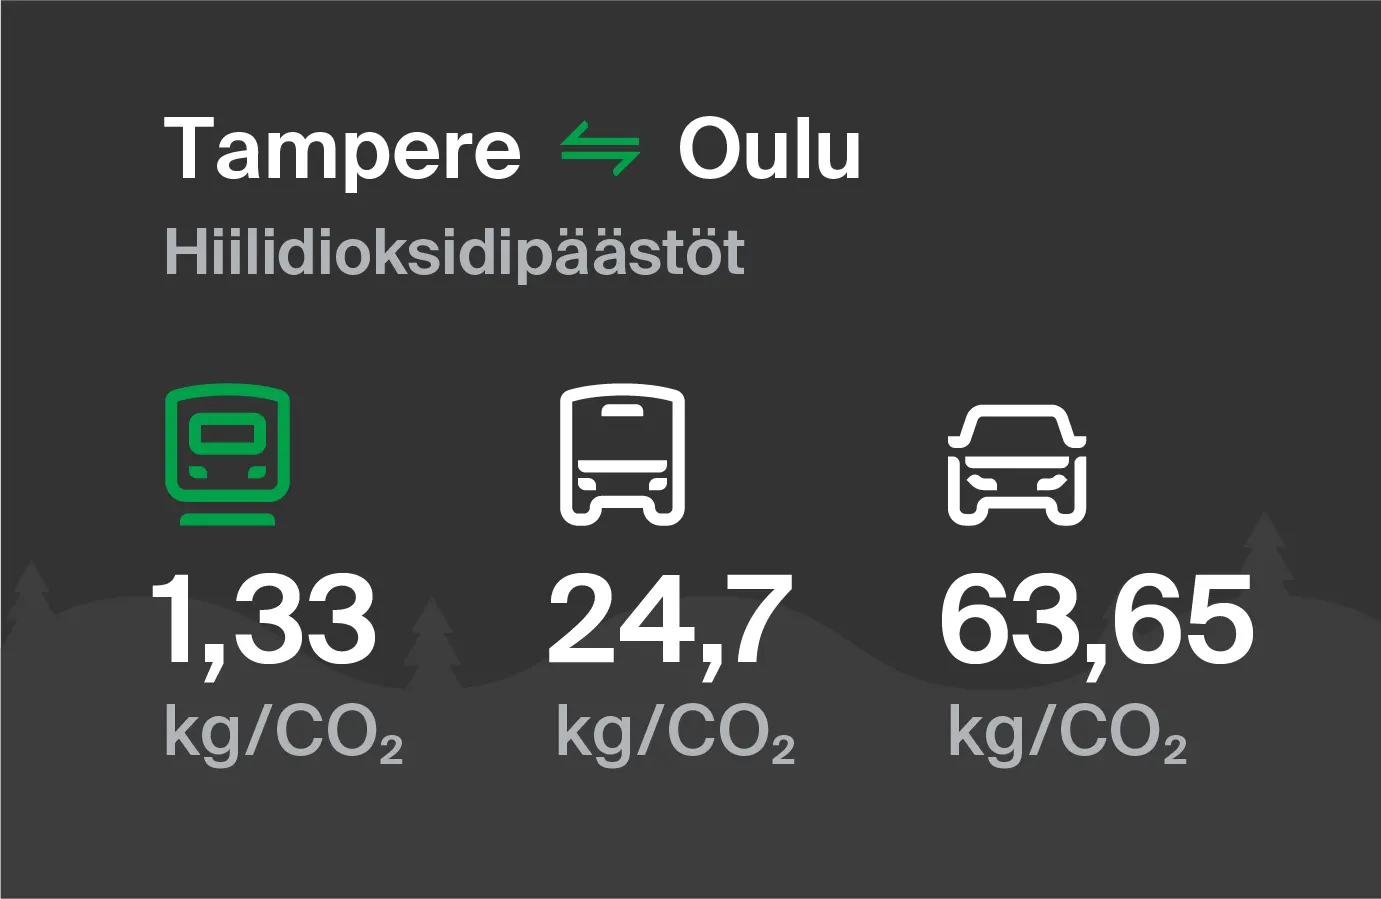 Carbon dioxide emissions from Tampere to Oulu by different modes of transport: by train 1.33 kg/CO2, by bus 24.7 kg/CO2 and by car 63.65 kg/CO2.